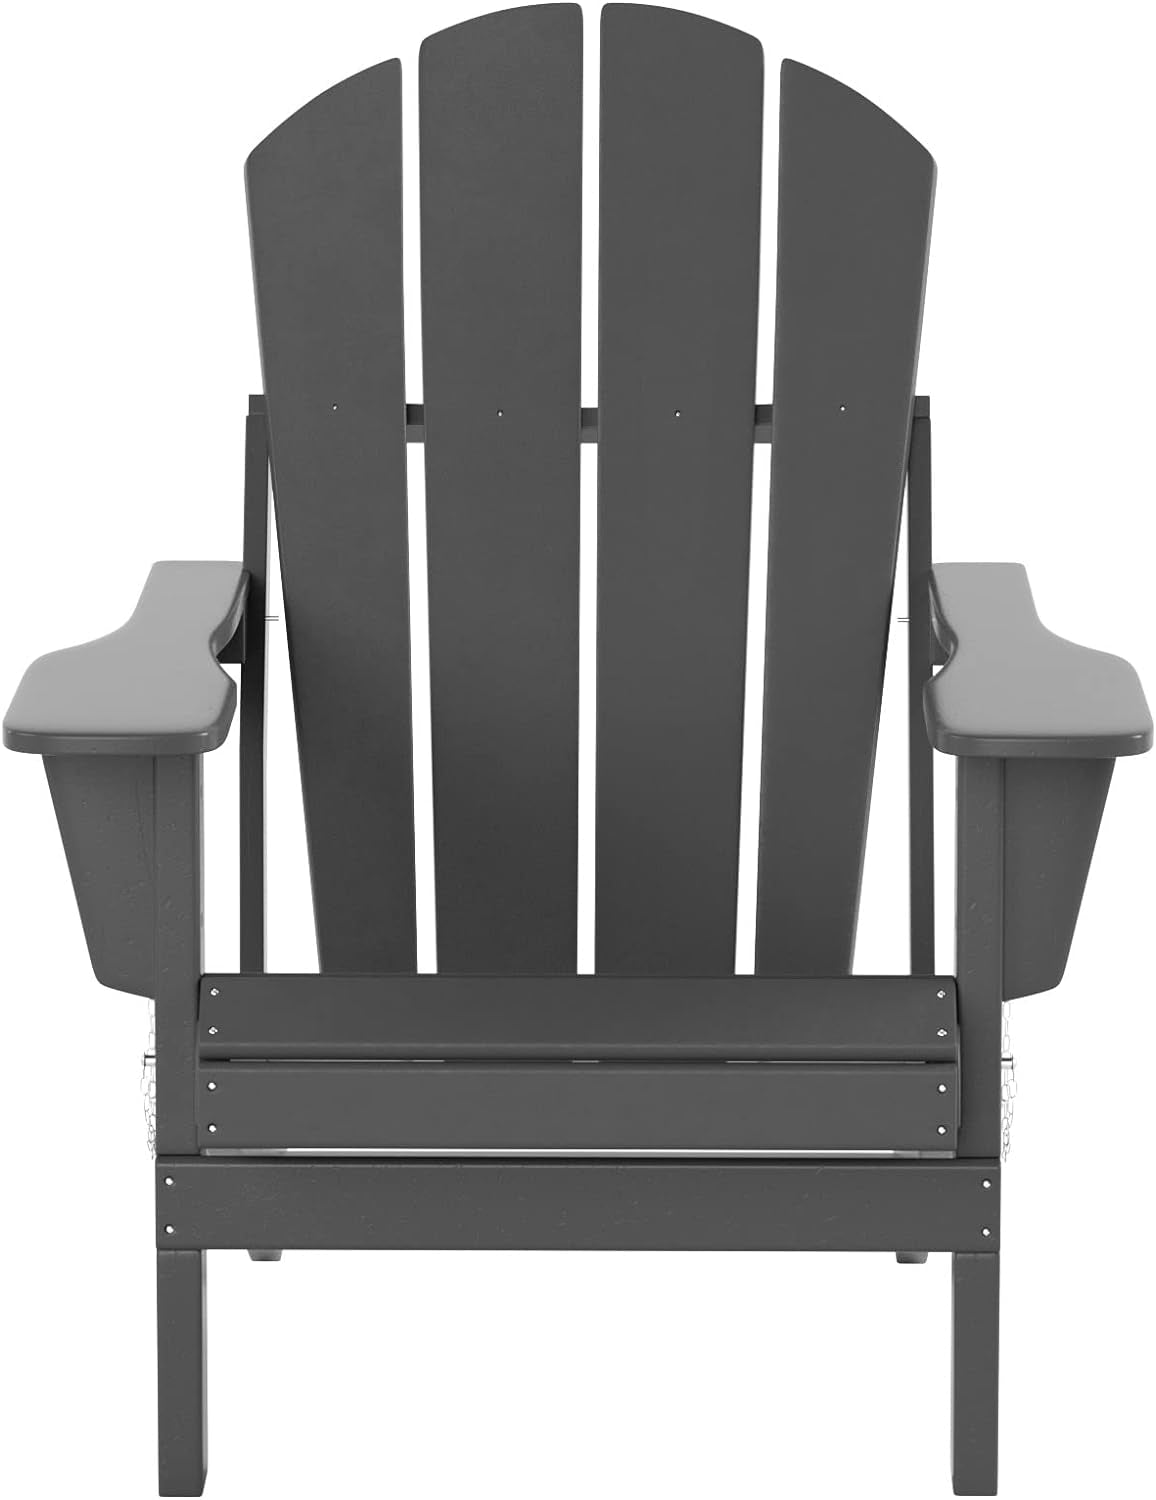 WO Home Furniture Set of 4 Pcs HDPE Adirondack Chairs Lounger Outdoor Folding Seat for Fire Pit, Beach, Balcony, Backyard, Lawn, Patio, Pool, Deck, Garden - Weather UV Resistant (Gray)